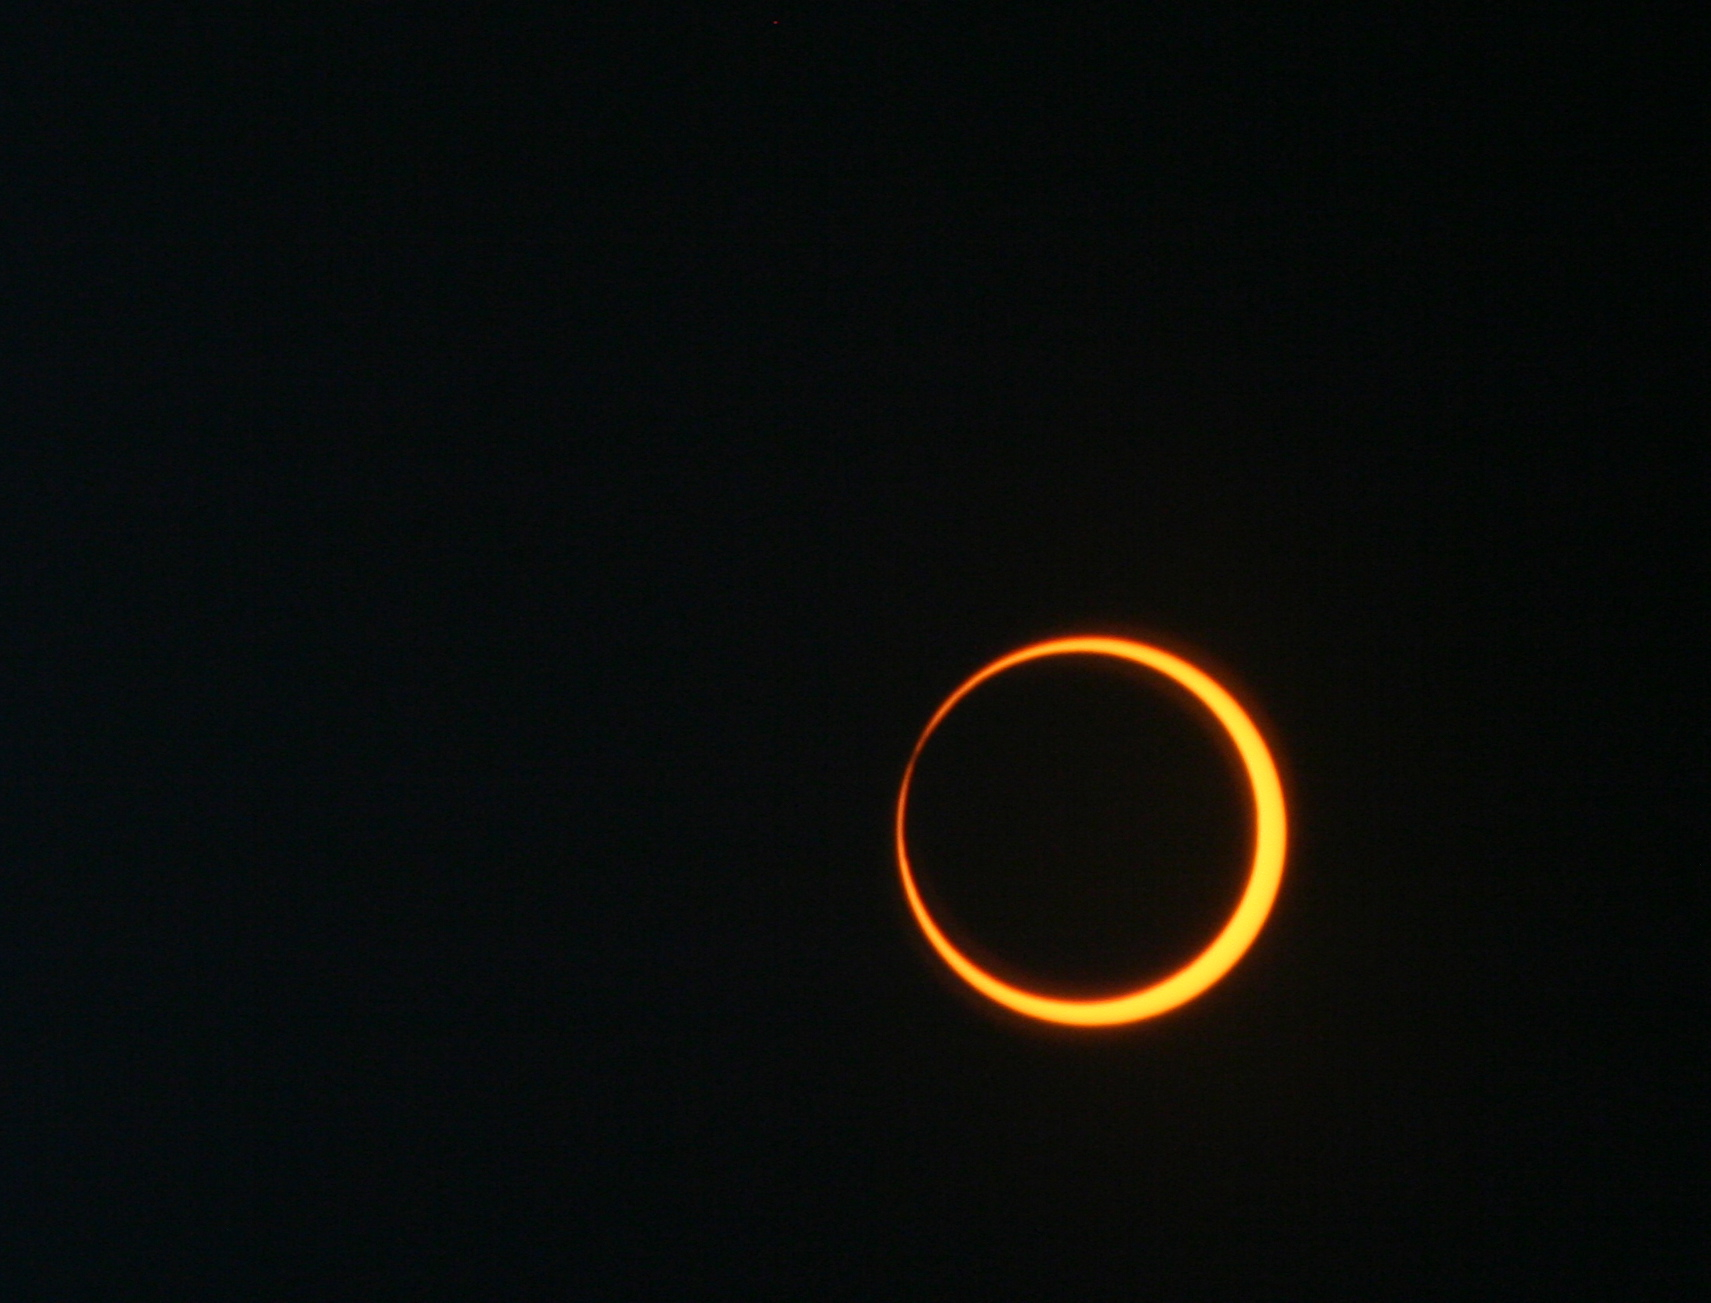 An annular solar eclipse photographed on May 20, 2012. Credit: NASA/Bill Dunford